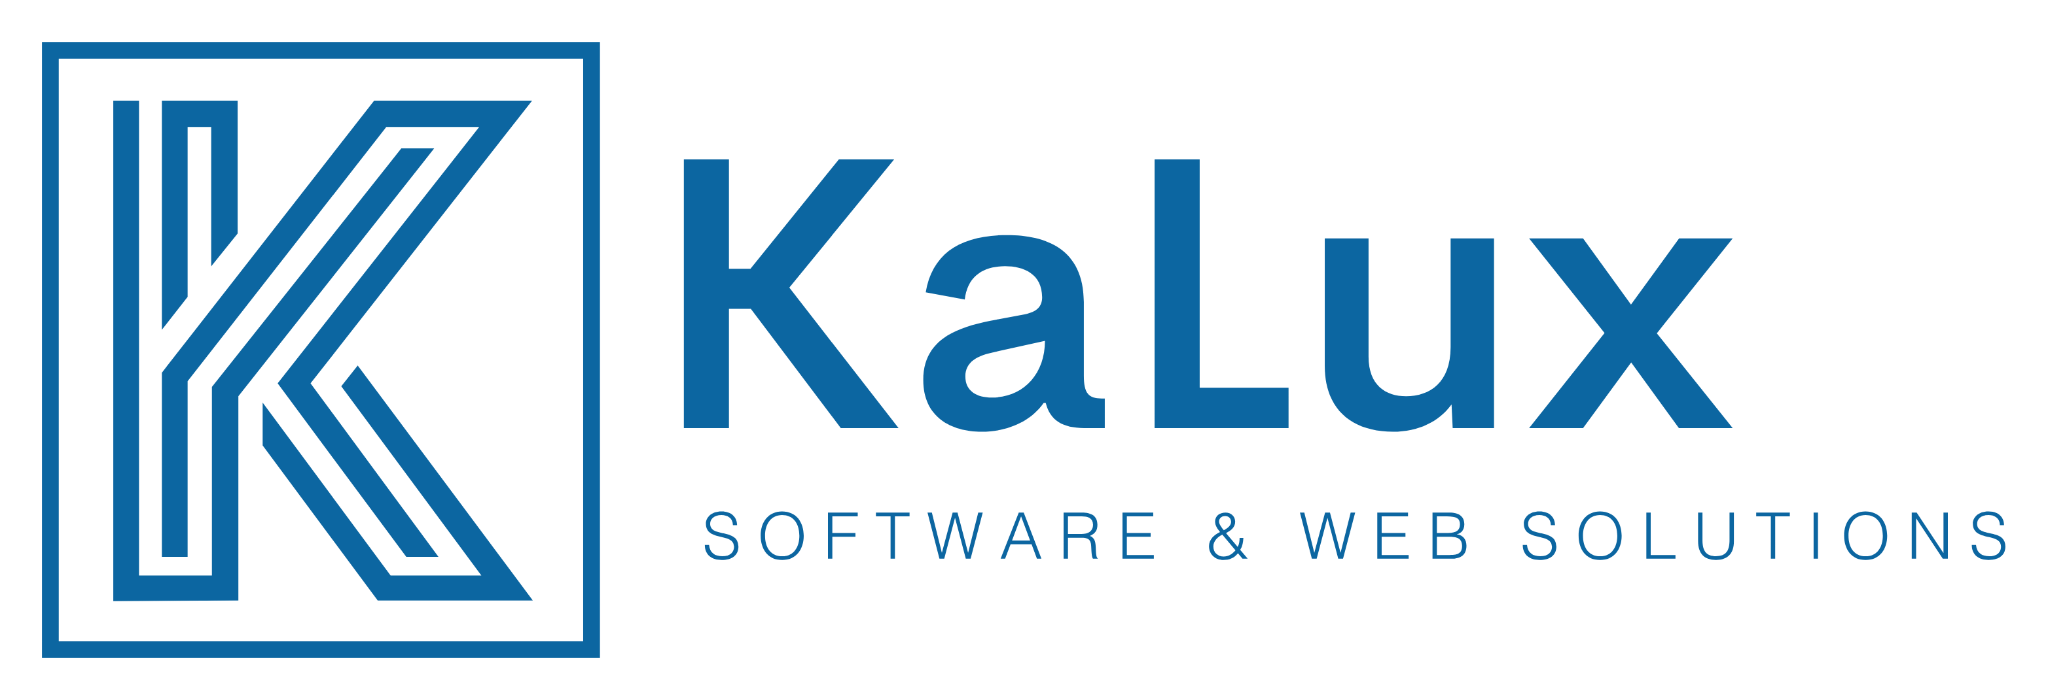 KaLux Software & Web Solutions